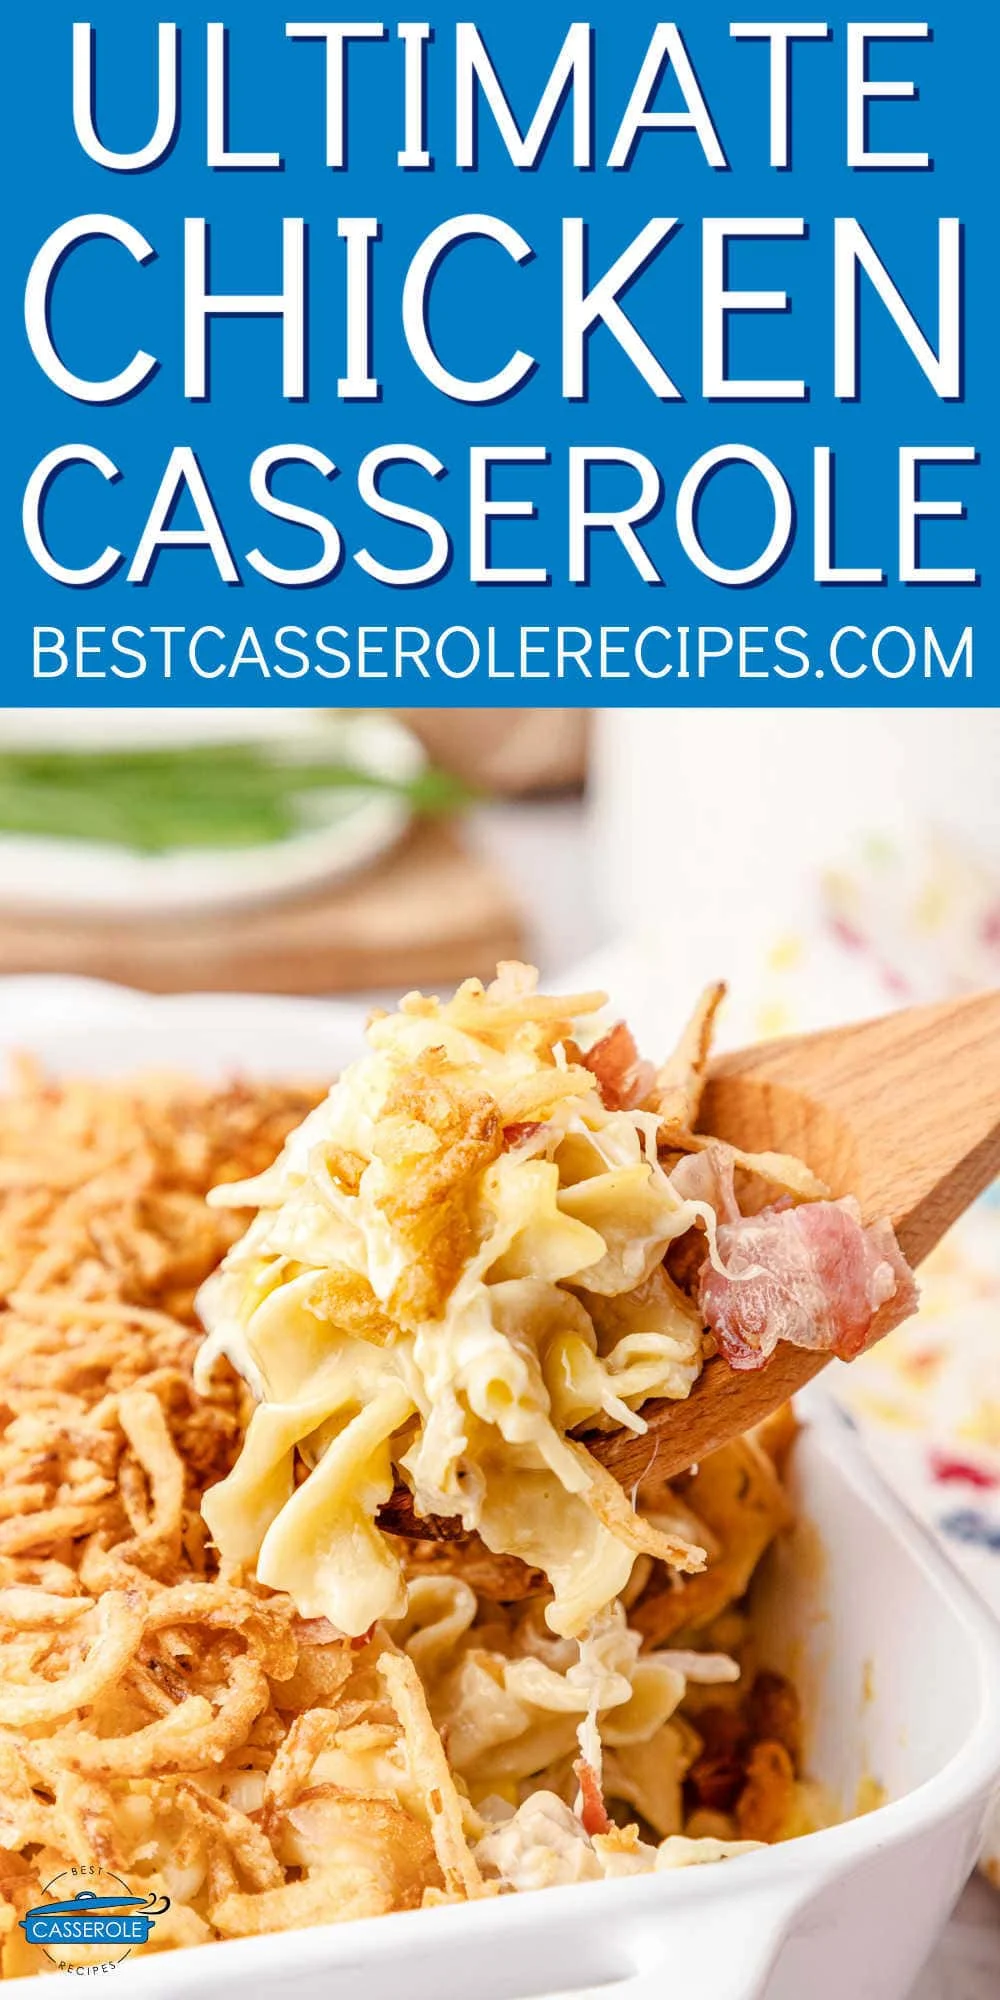 scoop of casserole with text "ultimate chicken"